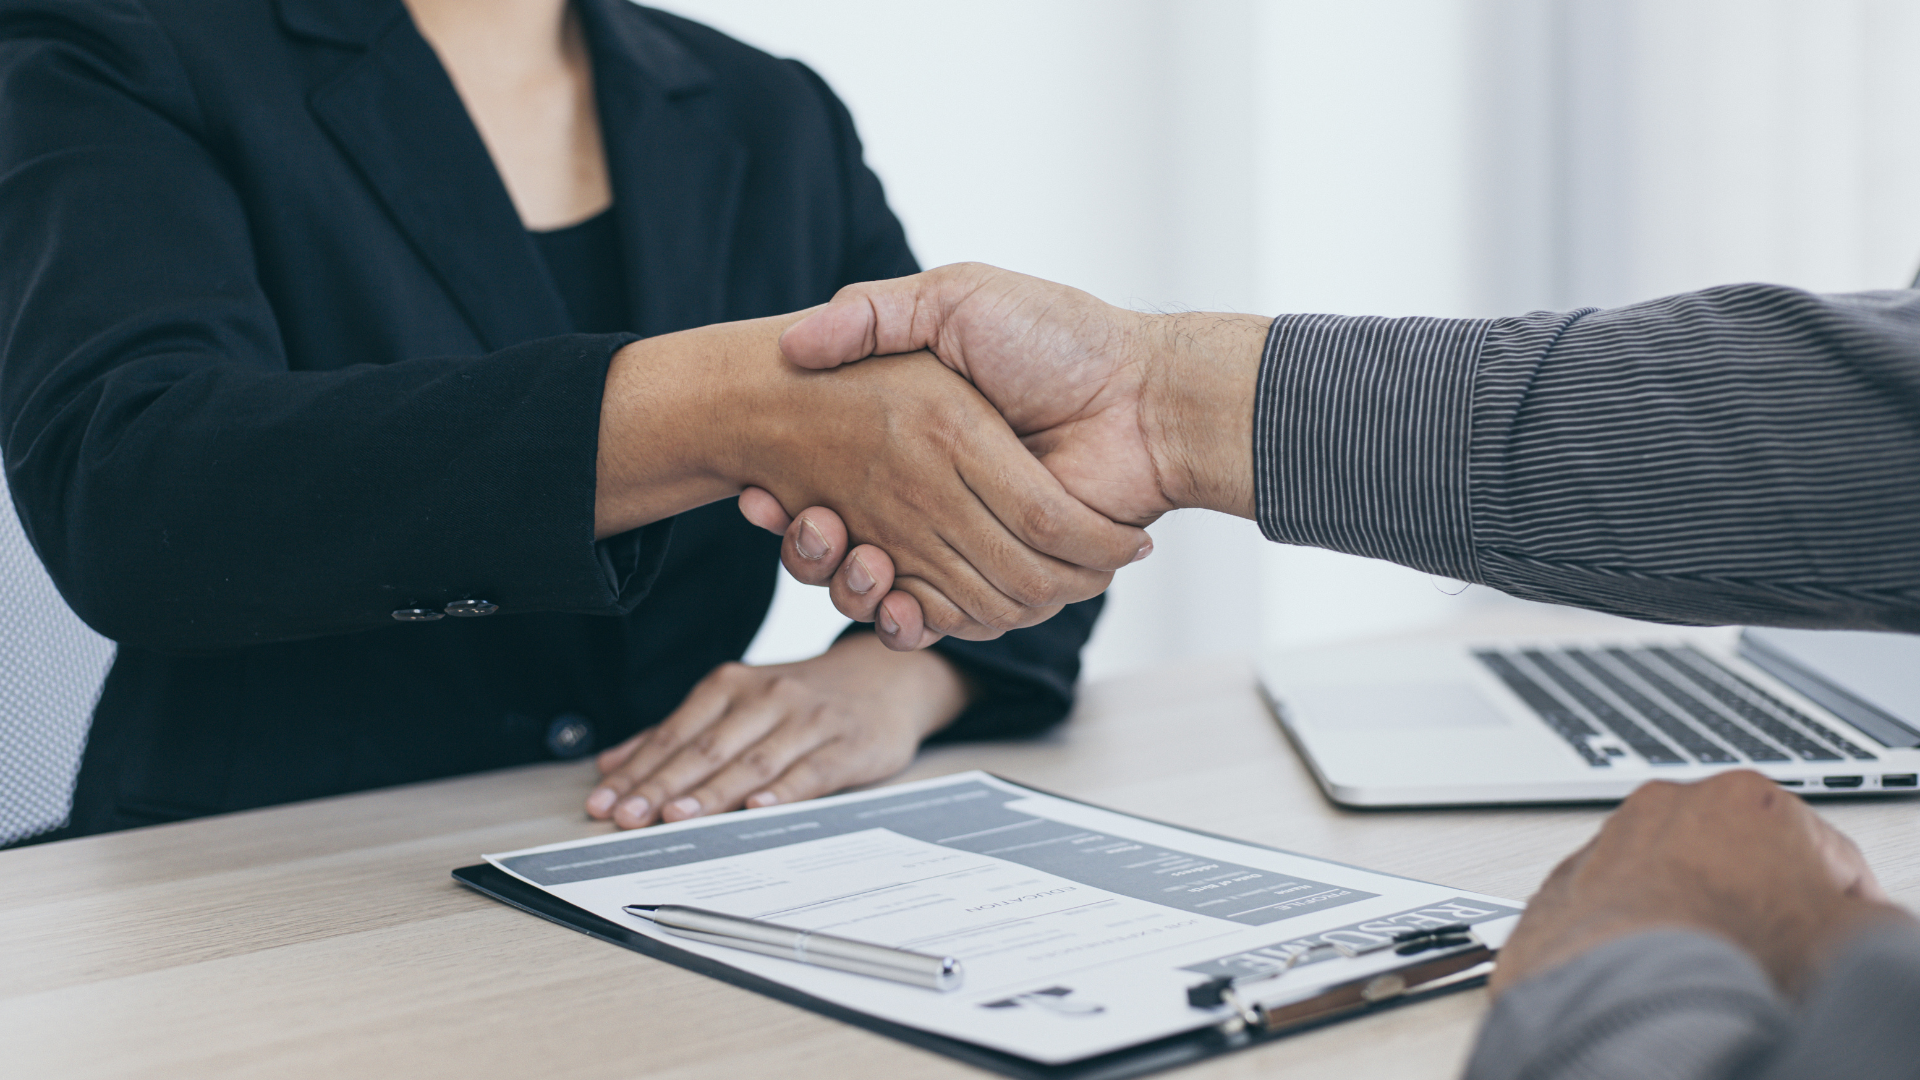 An image of a career candidate shaking hands with a hiring manager at a St. Catharines accounting firm.